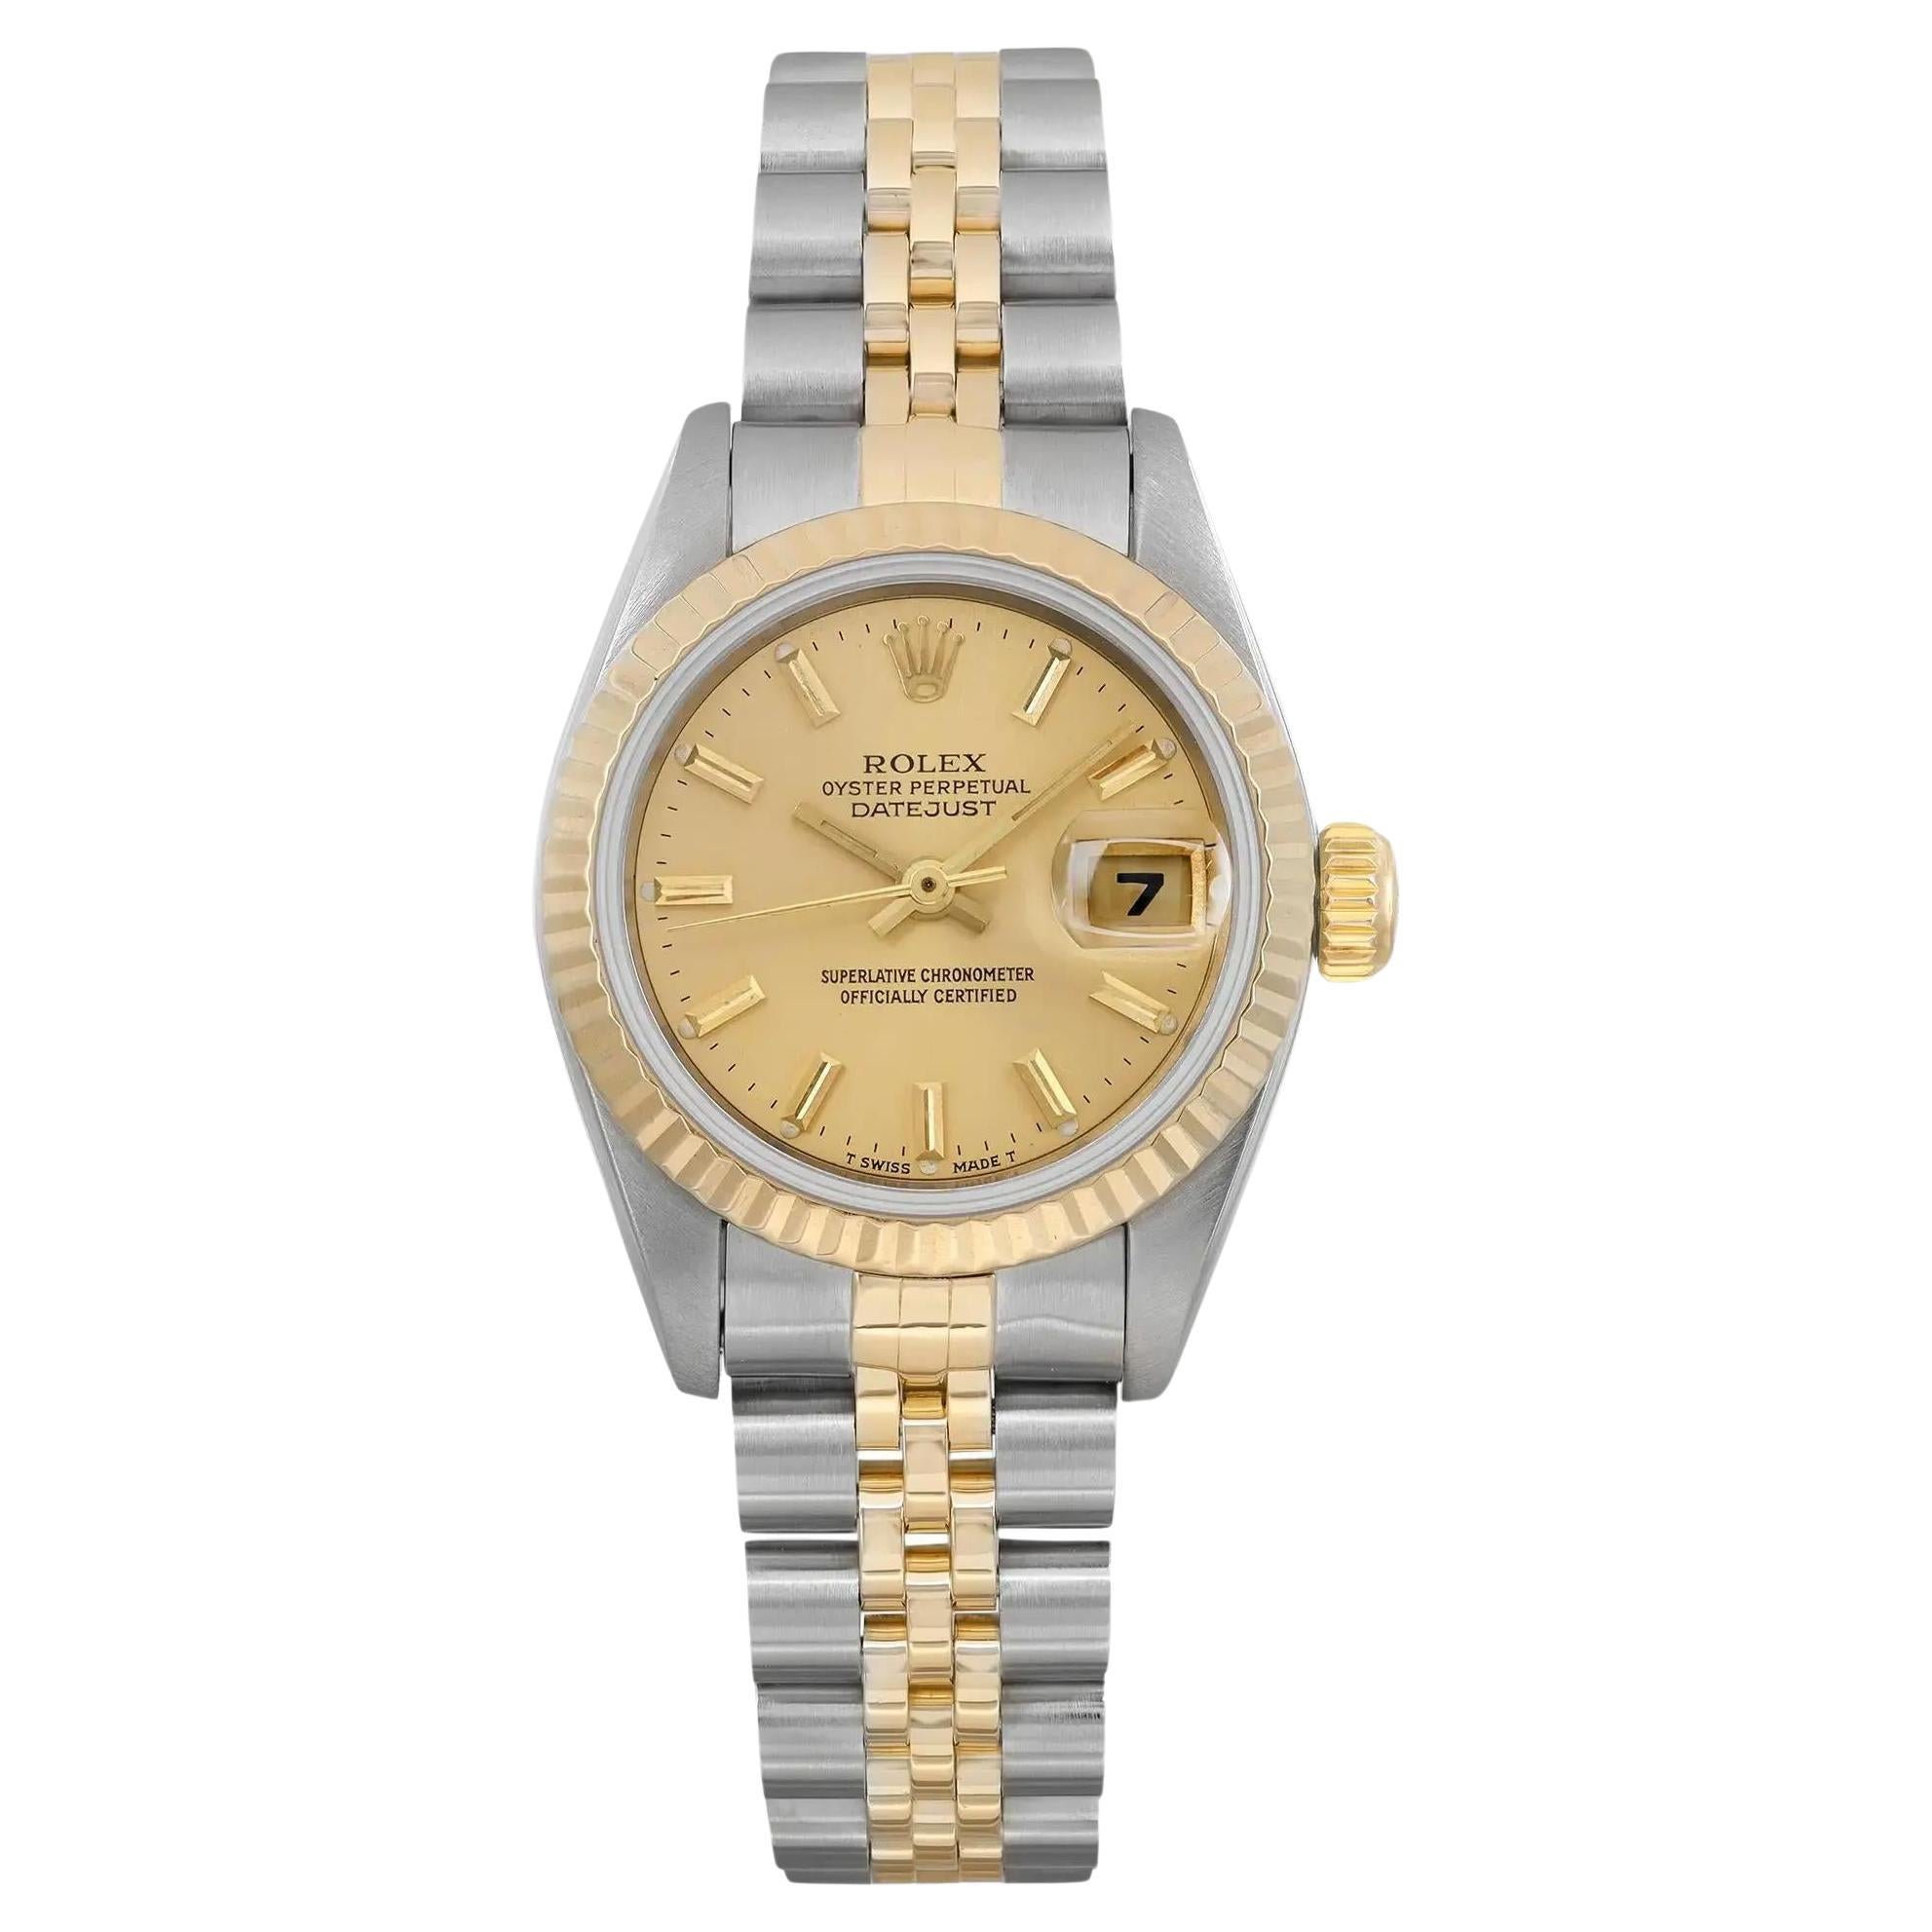 Rolex Datejust 26mm 18K Yellow Gold Steel No Holes Champagne Dial Watch 69173